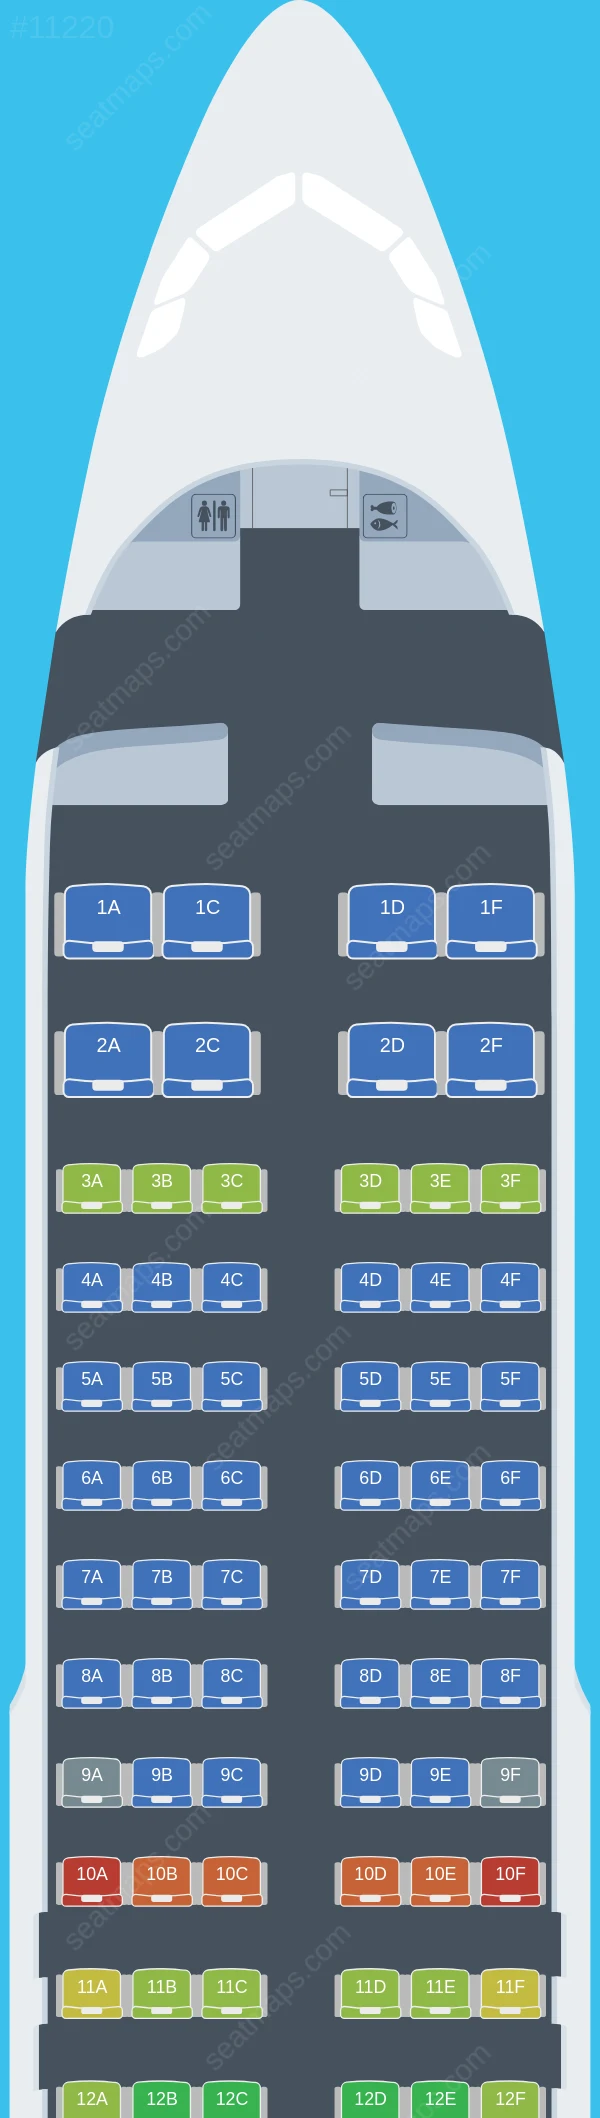 Bamboo Airways Airbus A320neo V.1 seatmap preview